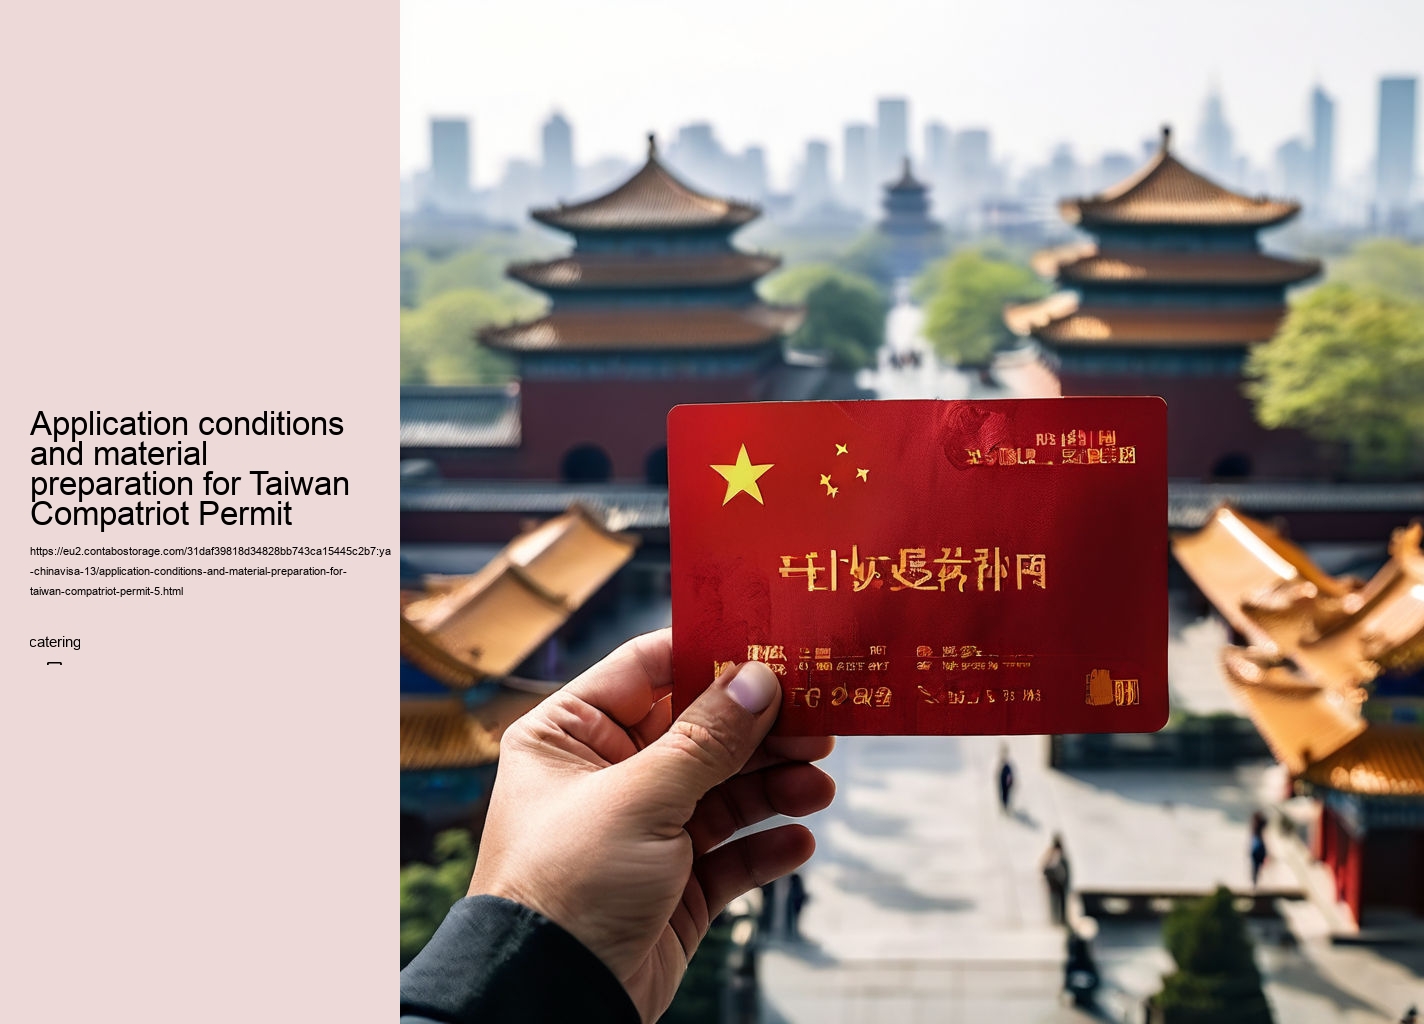 Application conditions and material preparation for Taiwan Compatriot Permit